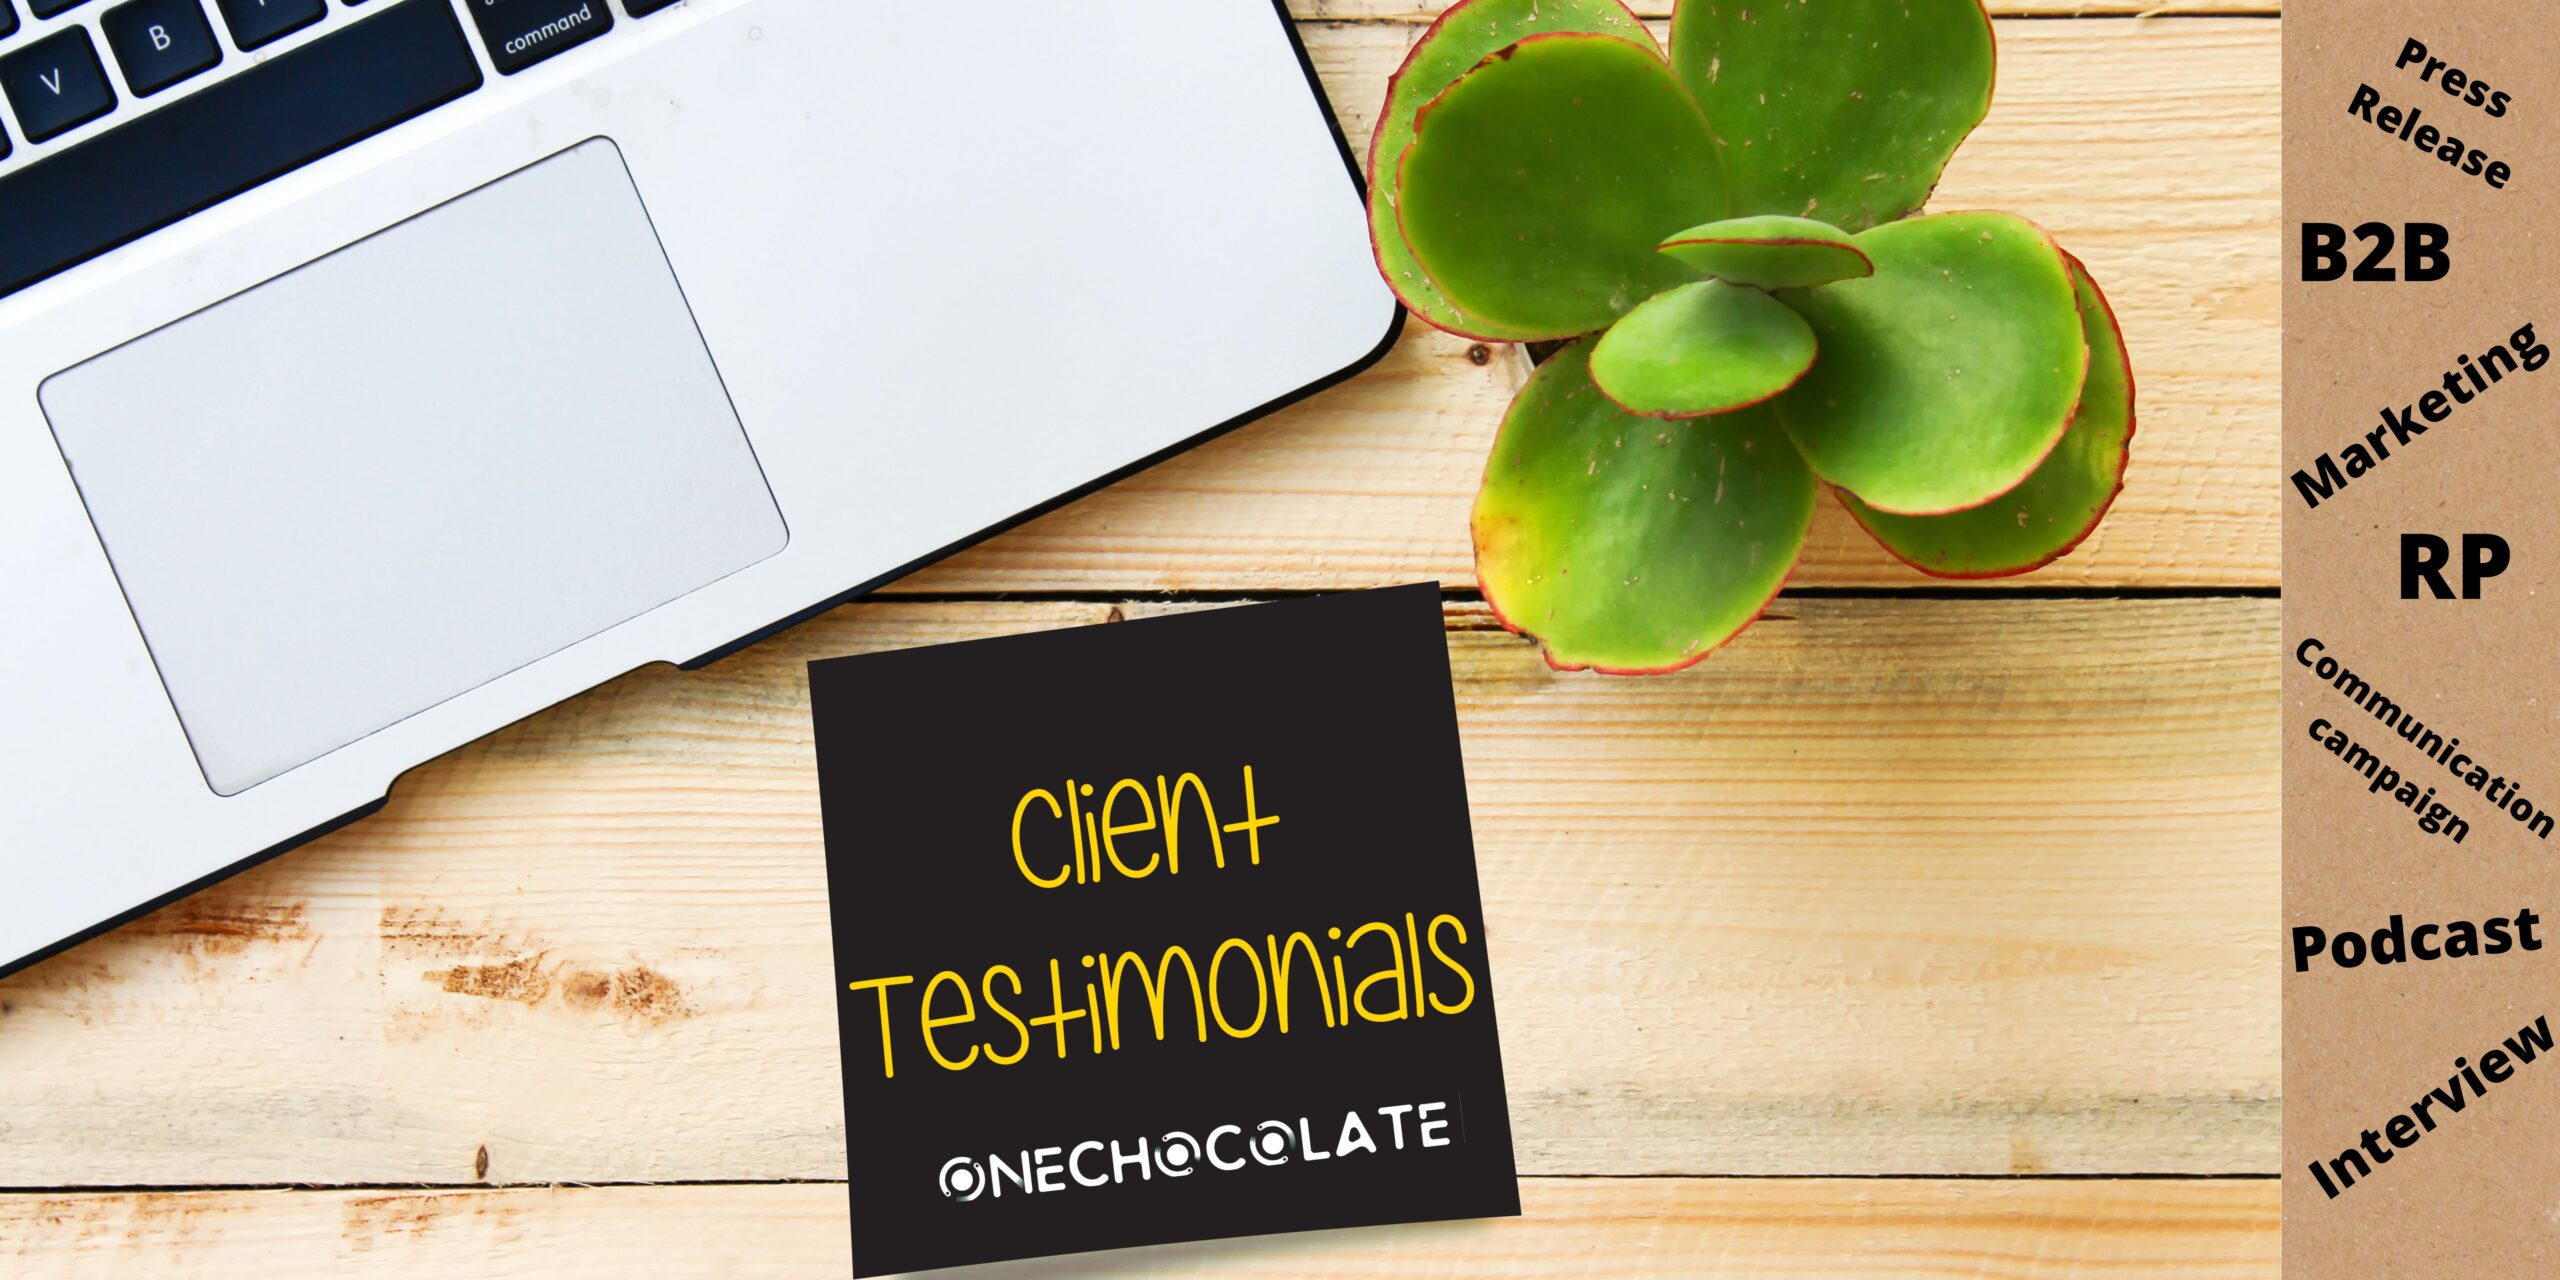 Why are customer testimonials a key component in PR campaigns?